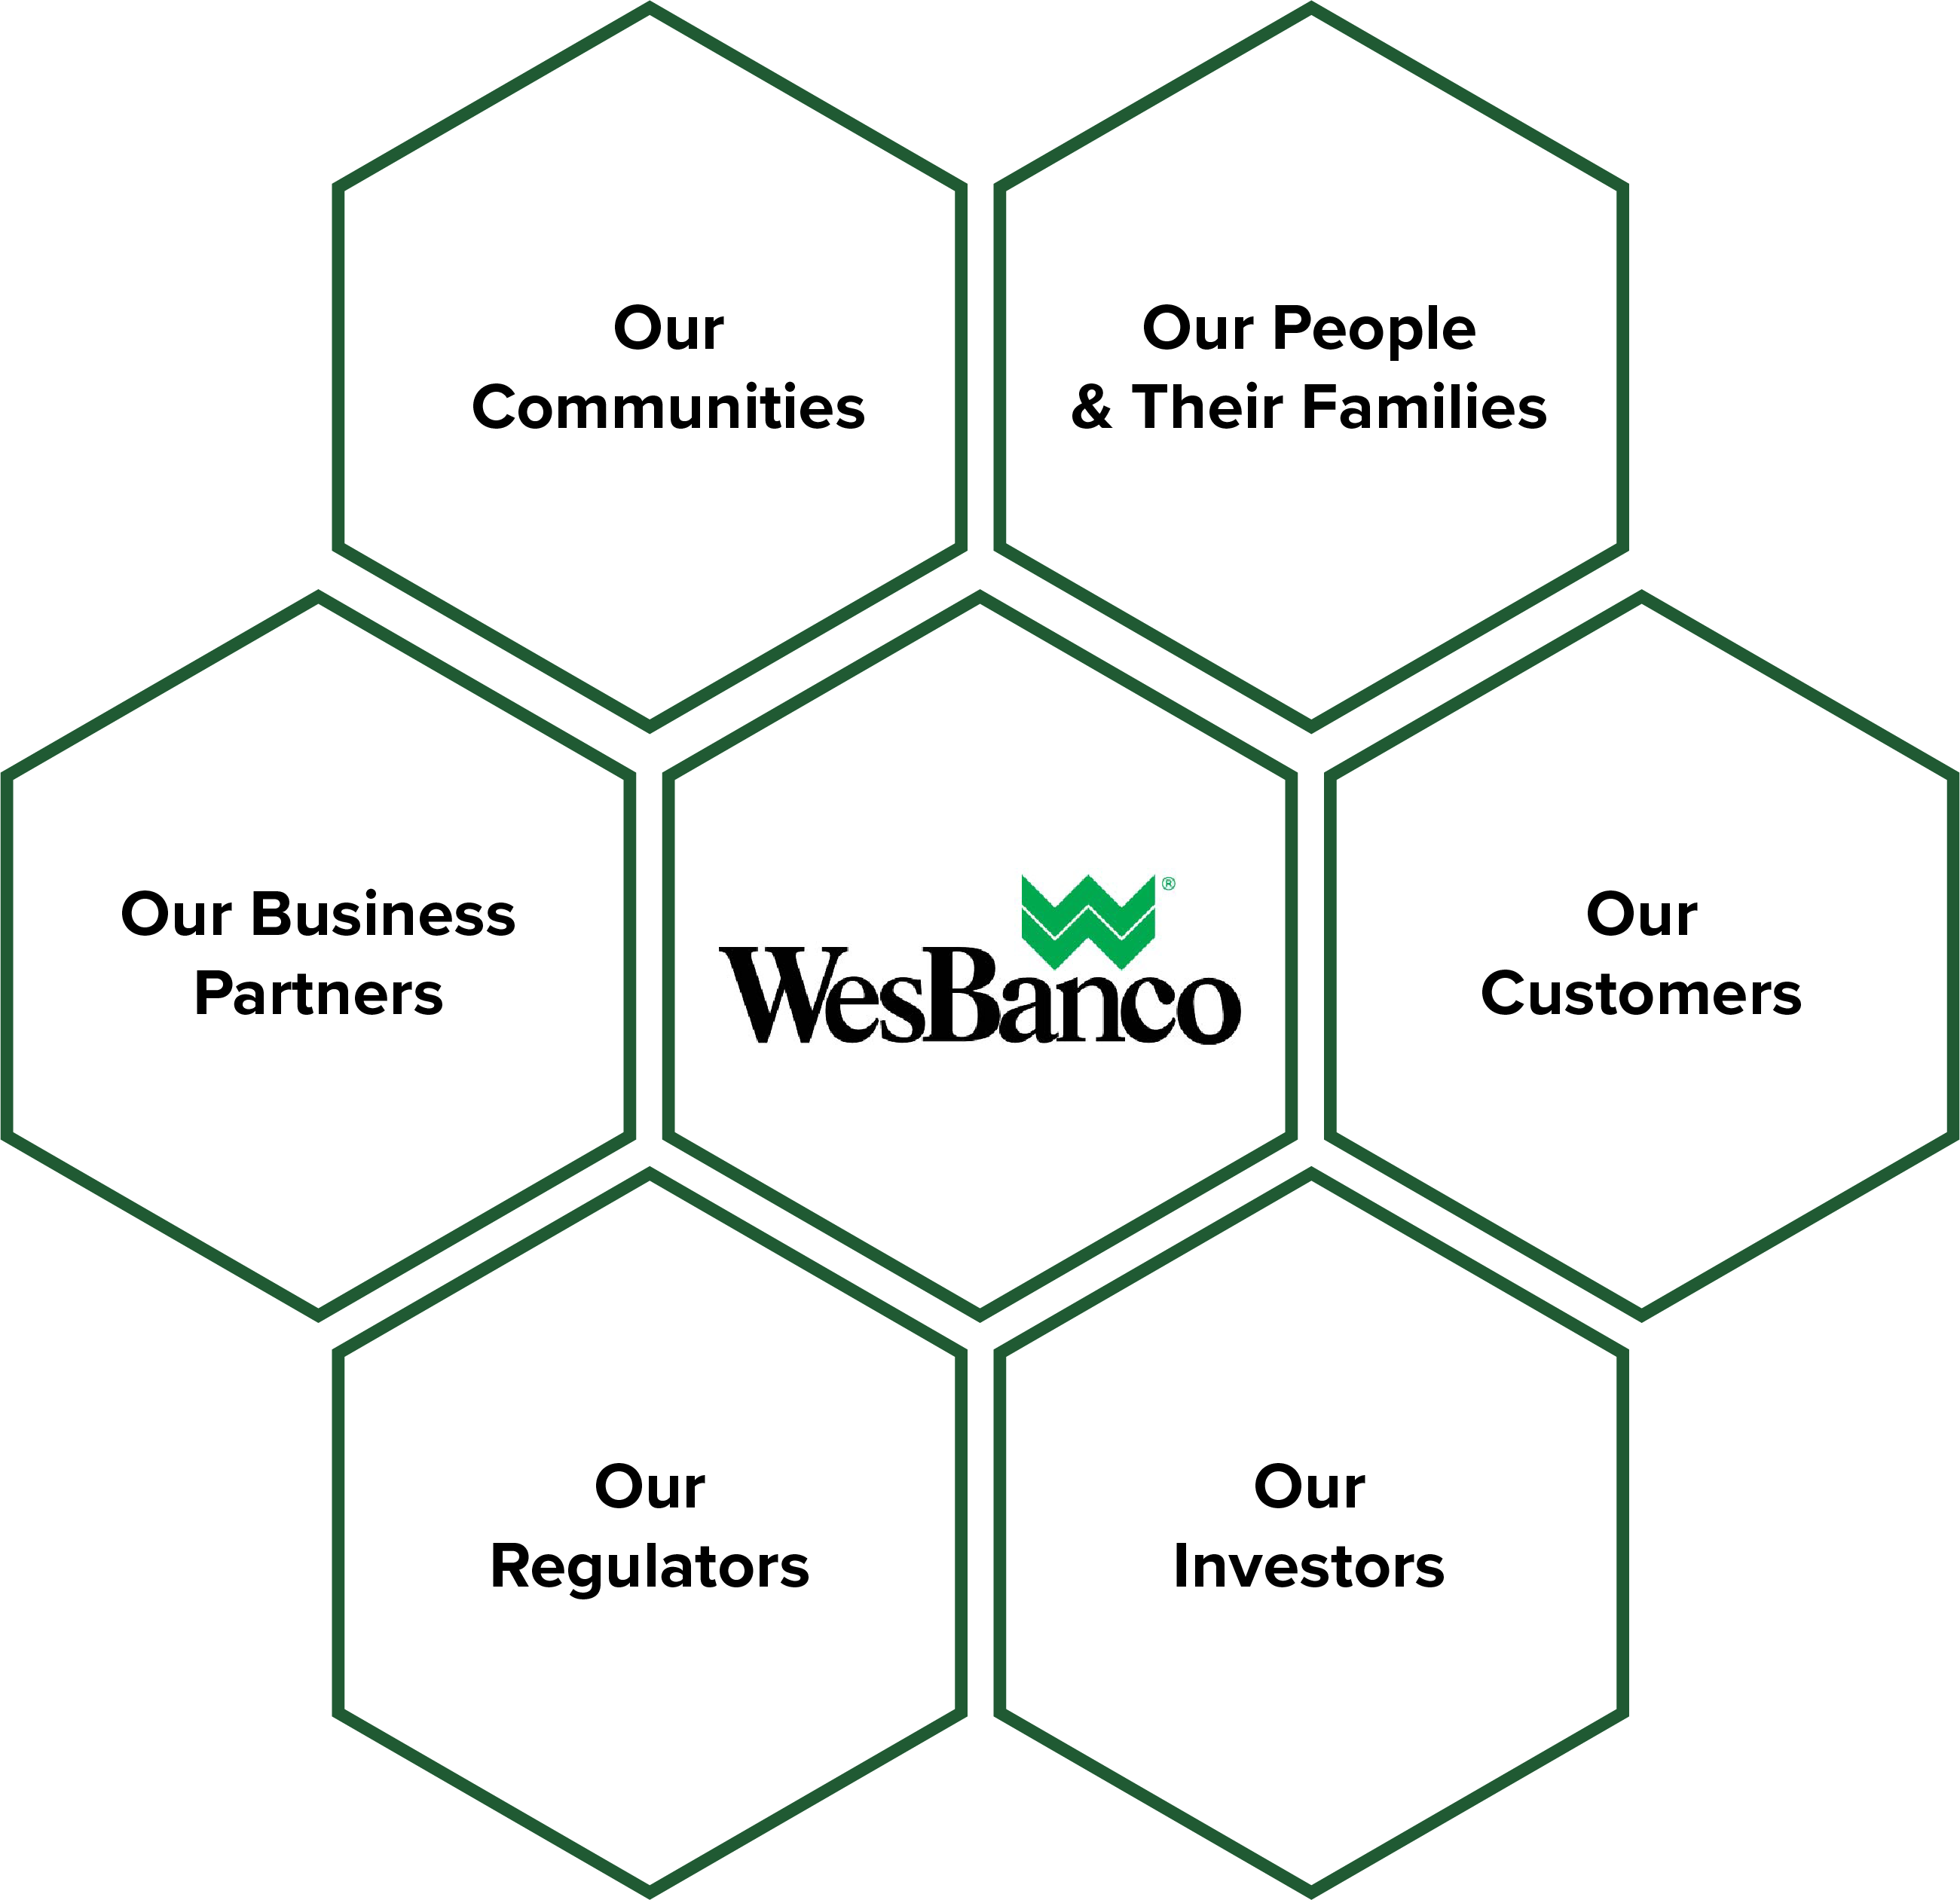 WesBanco: Our Communities | Our People & Their Families | Our Customers | Our Investors | Our Regulators | Our Business Partners